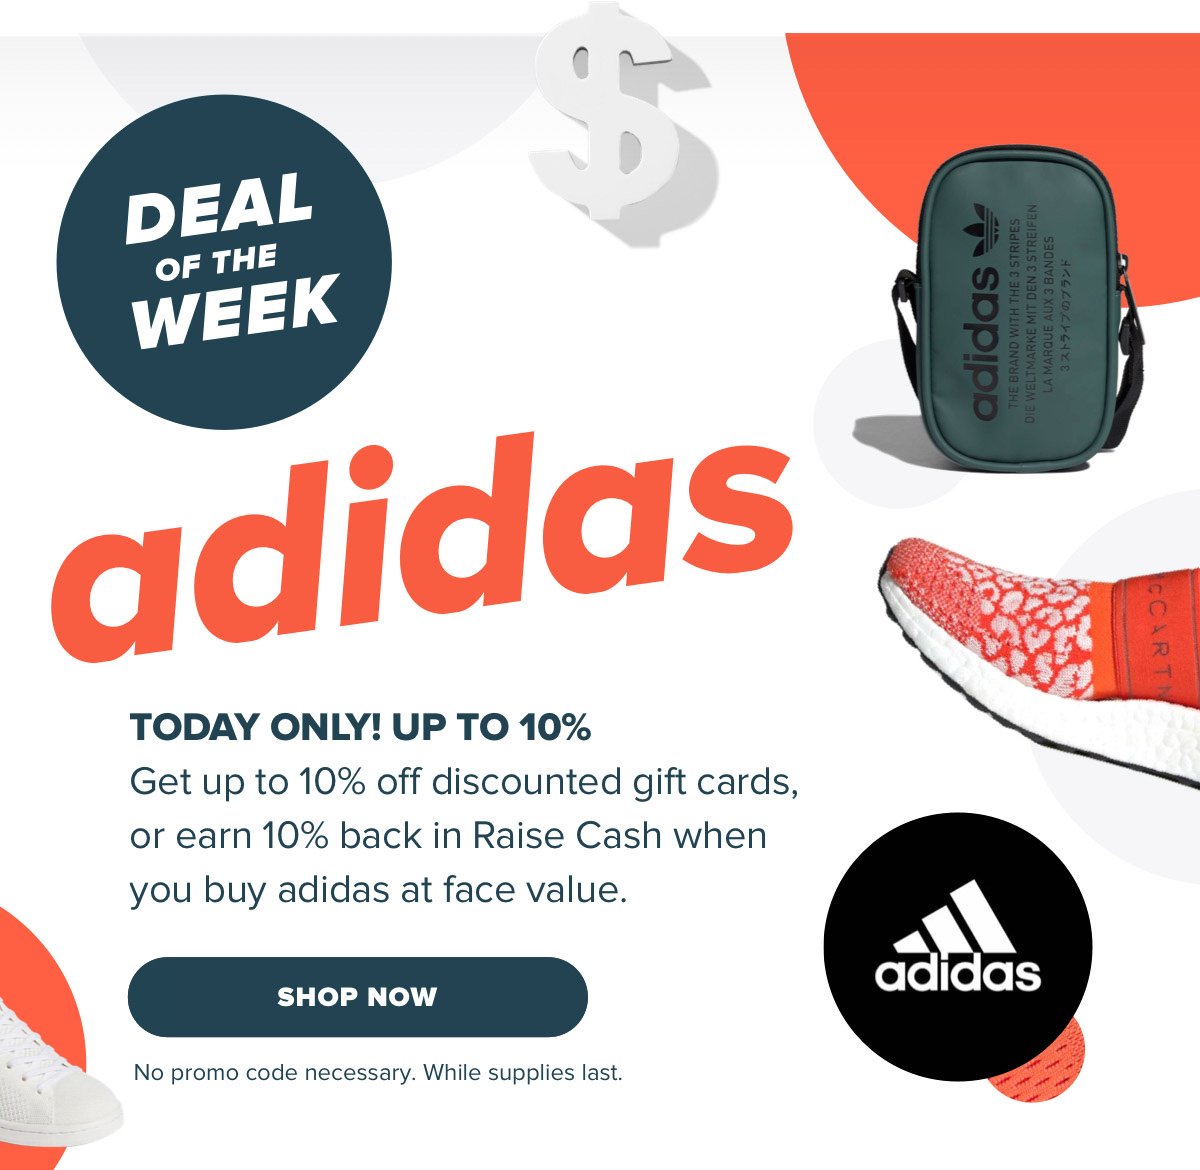 adidas deal of the week